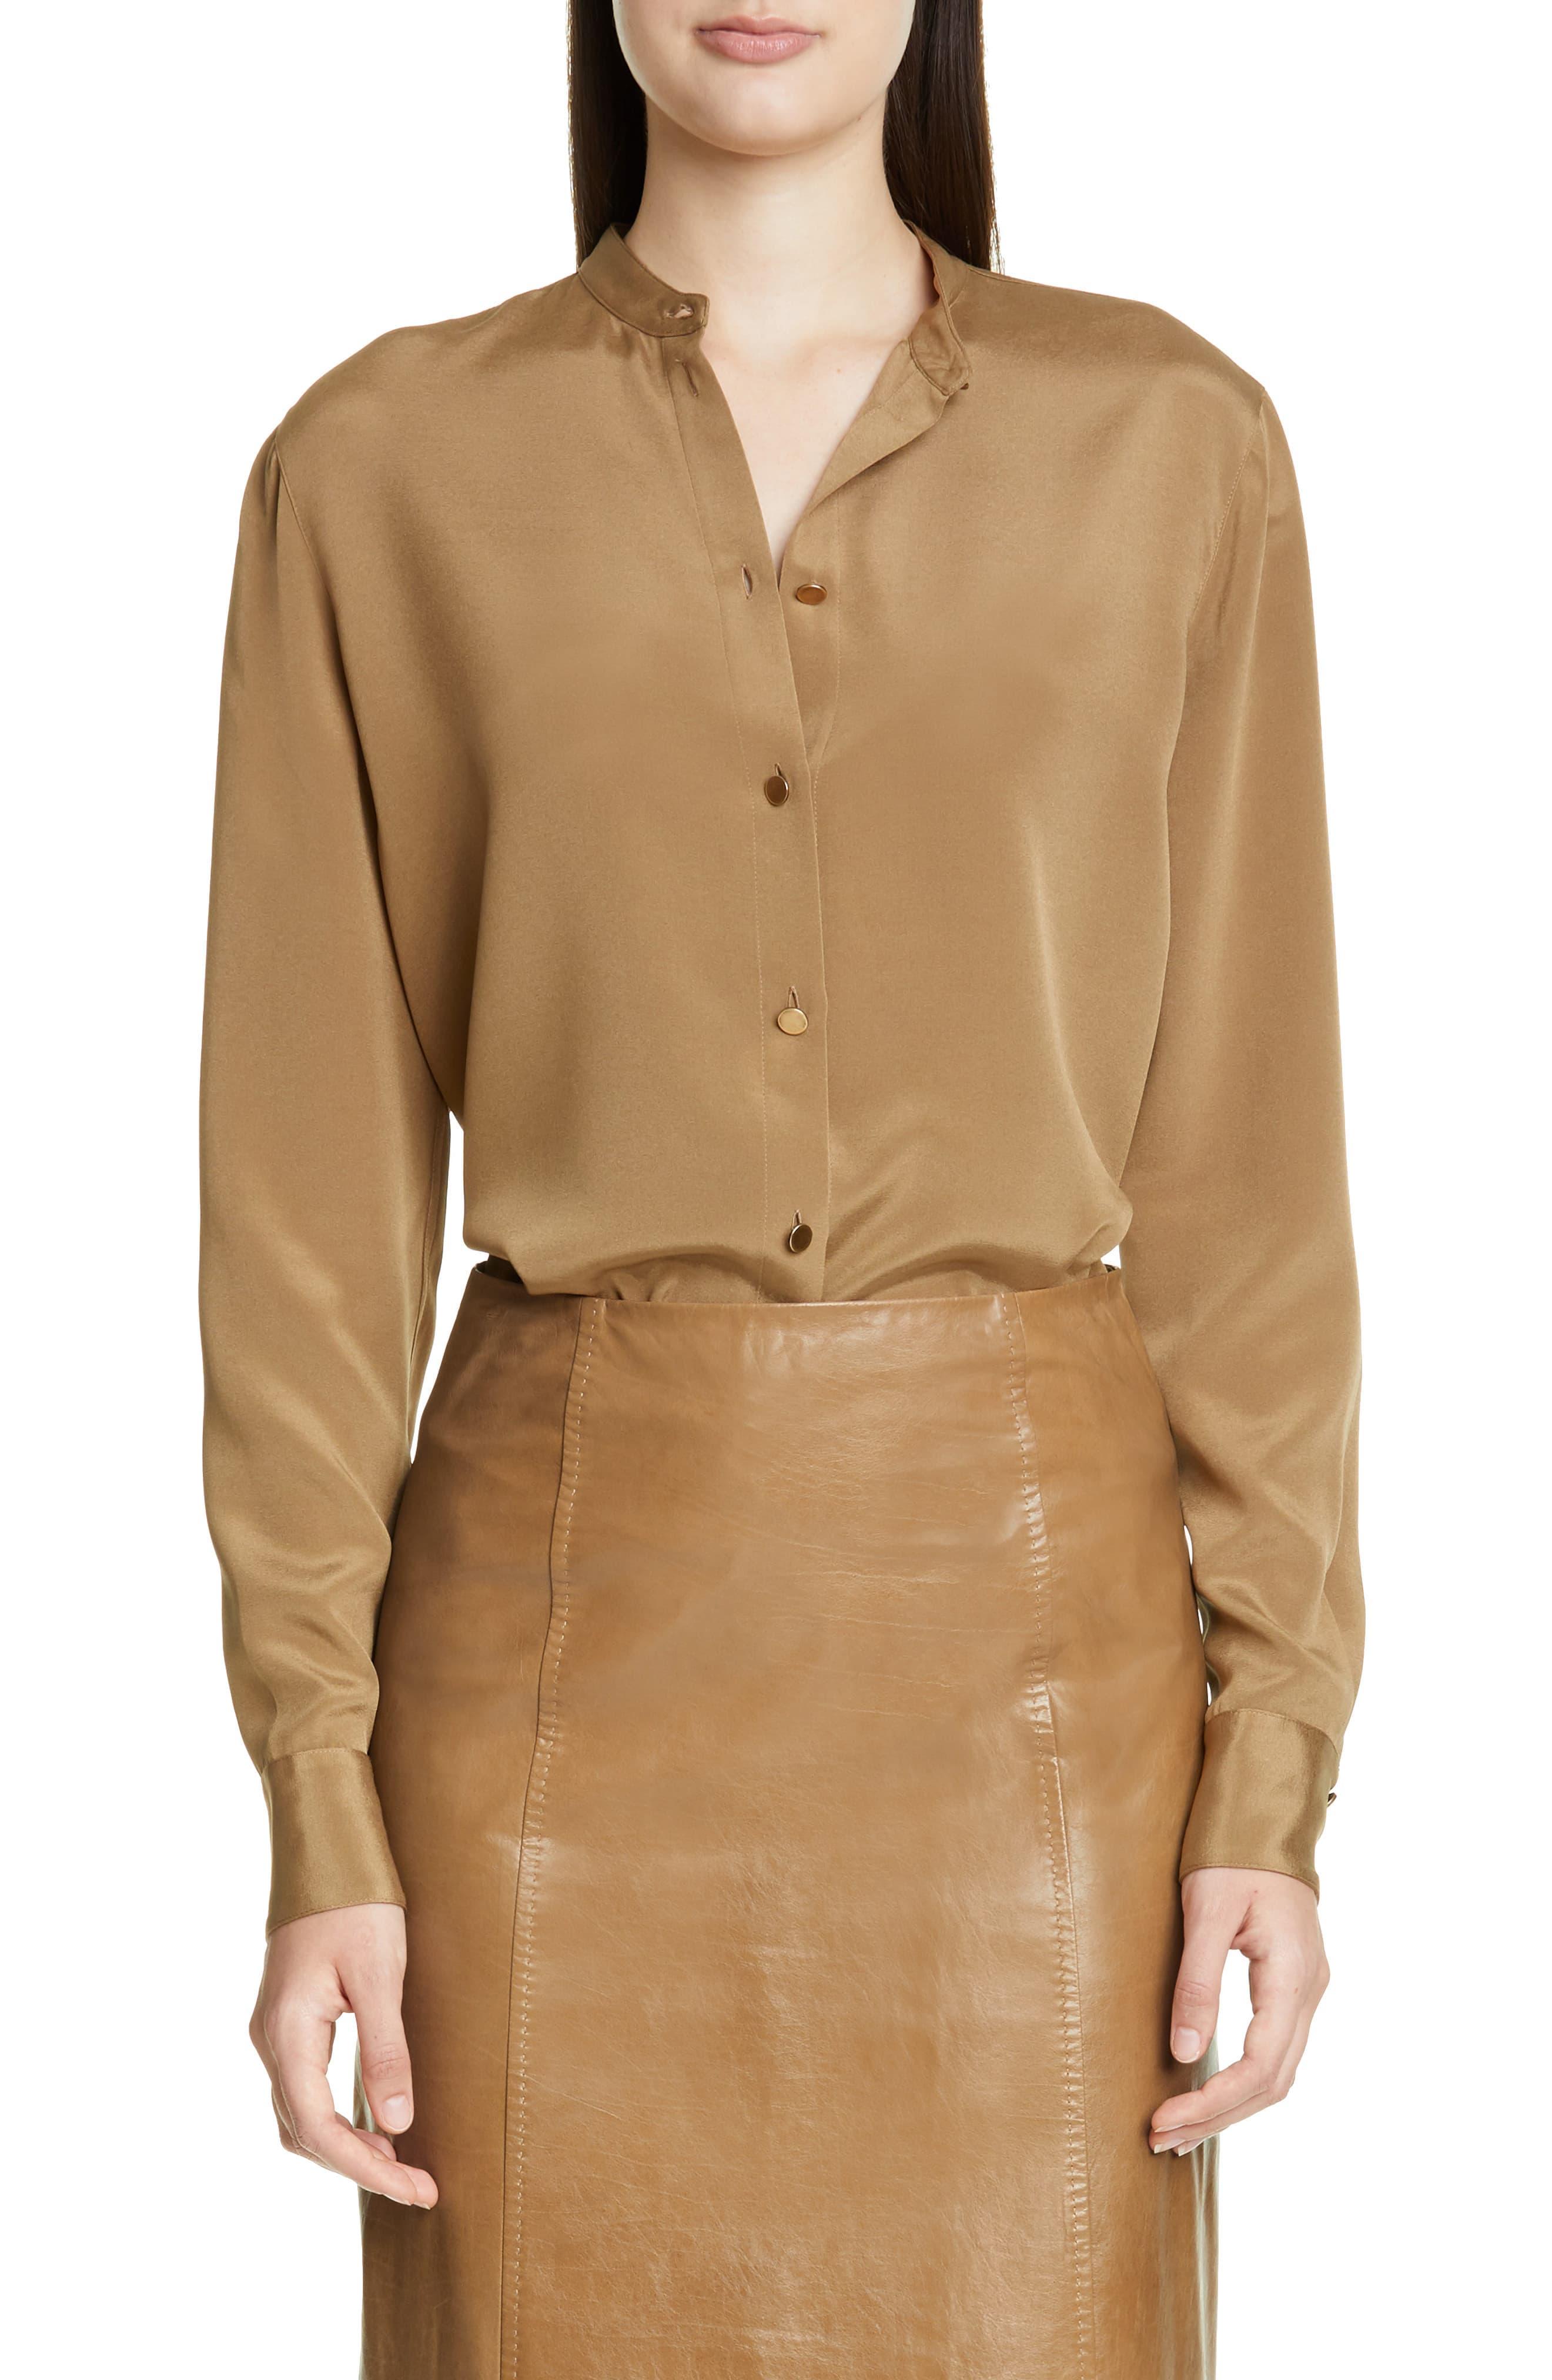 St. John Stretch Silk Crepe Blouse in Tobacco (Brown) - Lyst